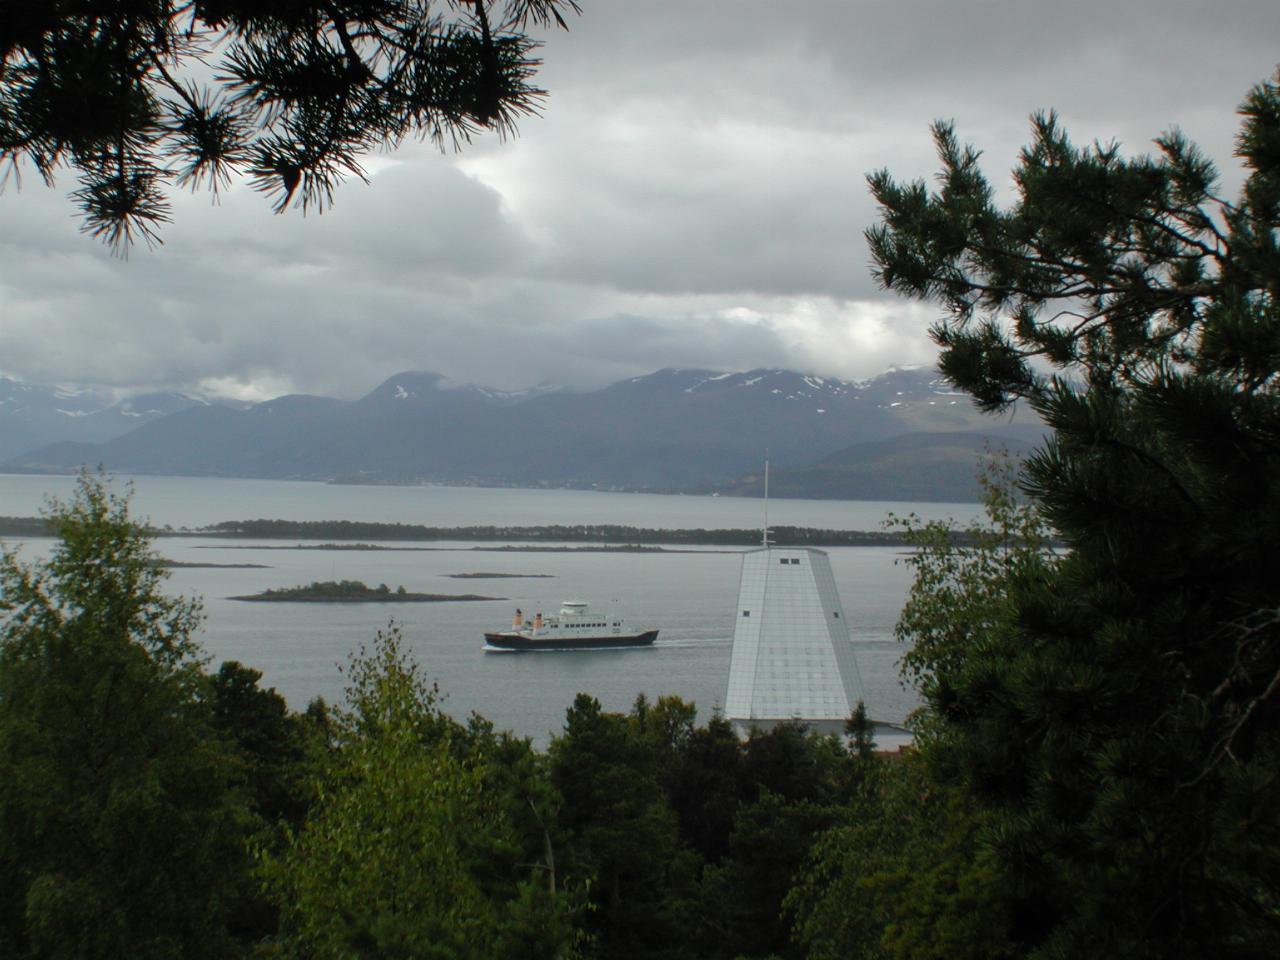 KPLU Viking Jazz: Rica Seilet (Sail) Hotel, as seen from Reknes Park, Molde with ferry passing by